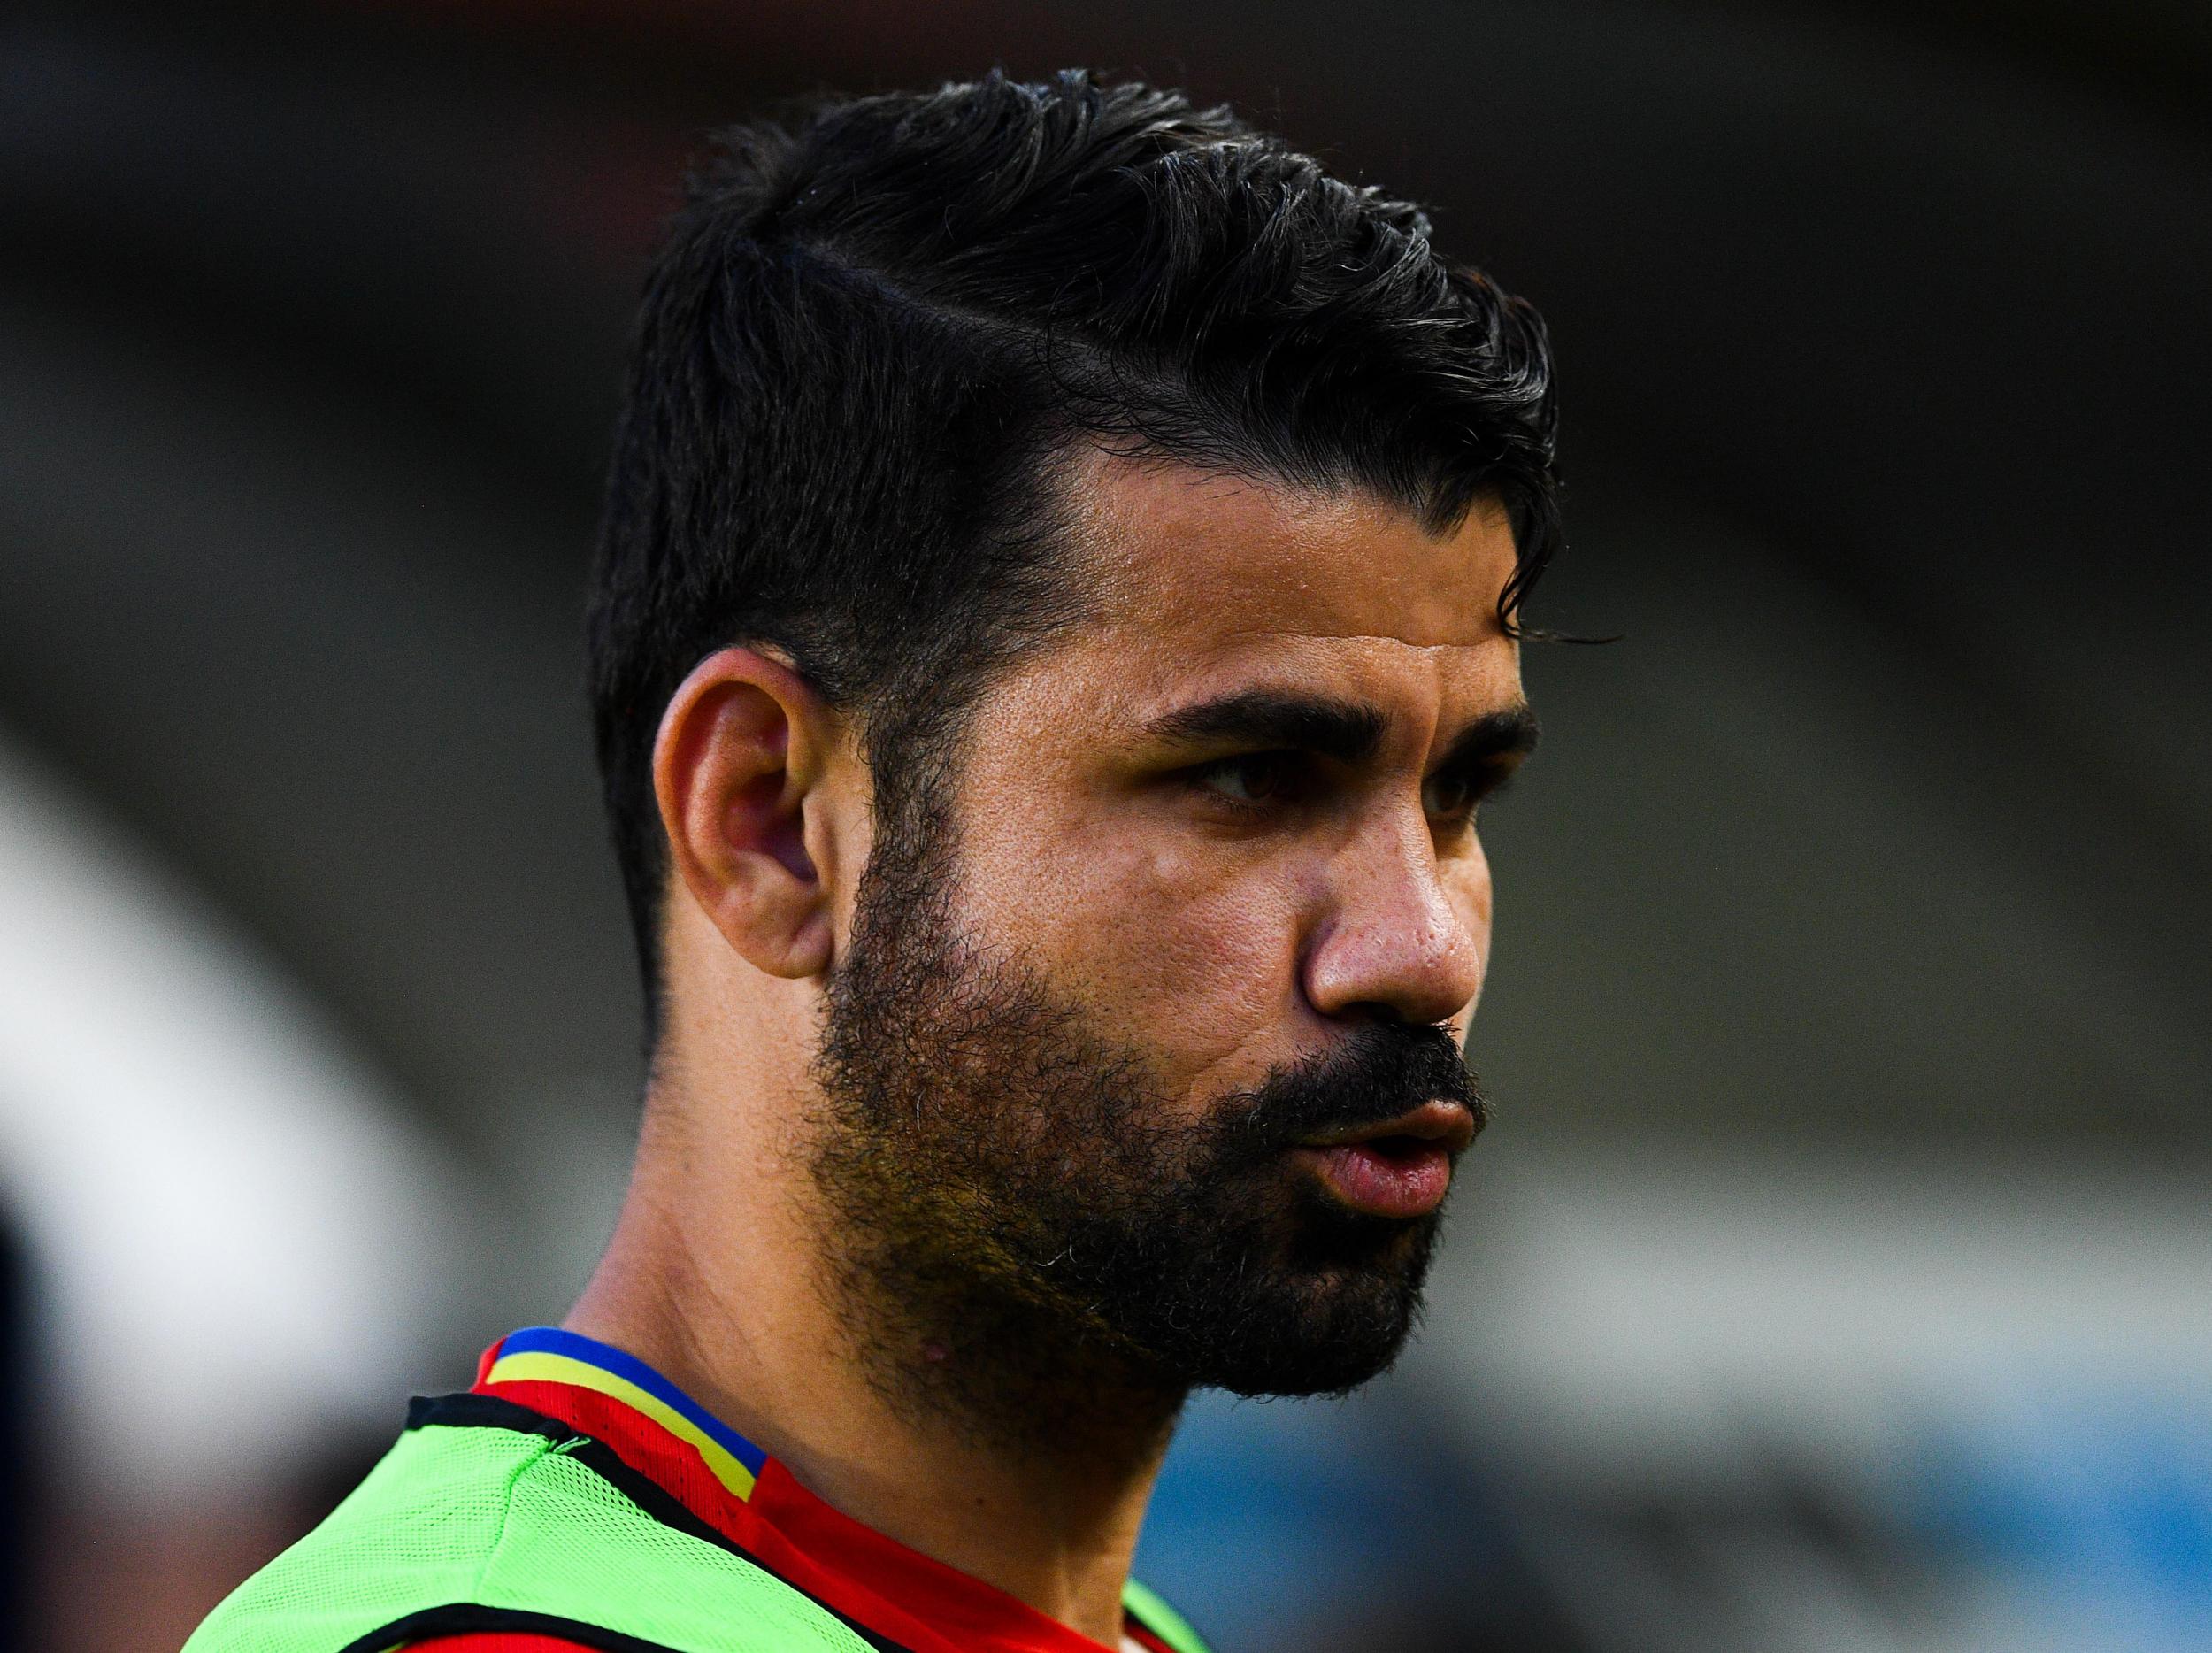 A deal worth more than £44m was agreed for Costa